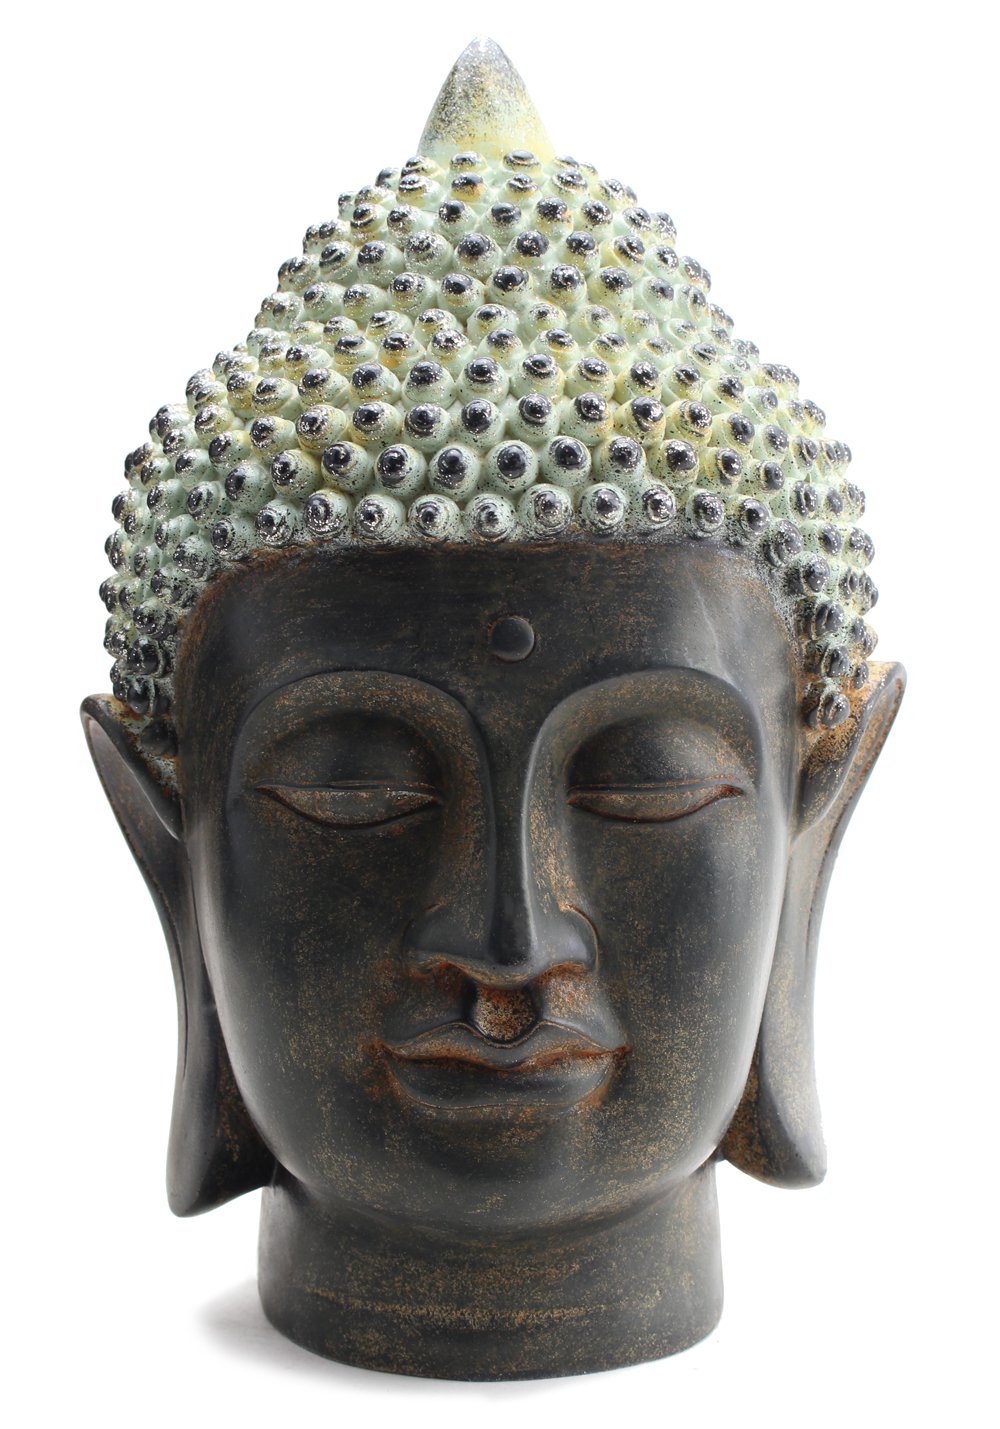 We pay your sales tax Smiling Meditating Buddha Shakyamuni Head Statue 10.5" Tall Blessing Mercy & Love Peaceful Feng Shui Idea (G16628)